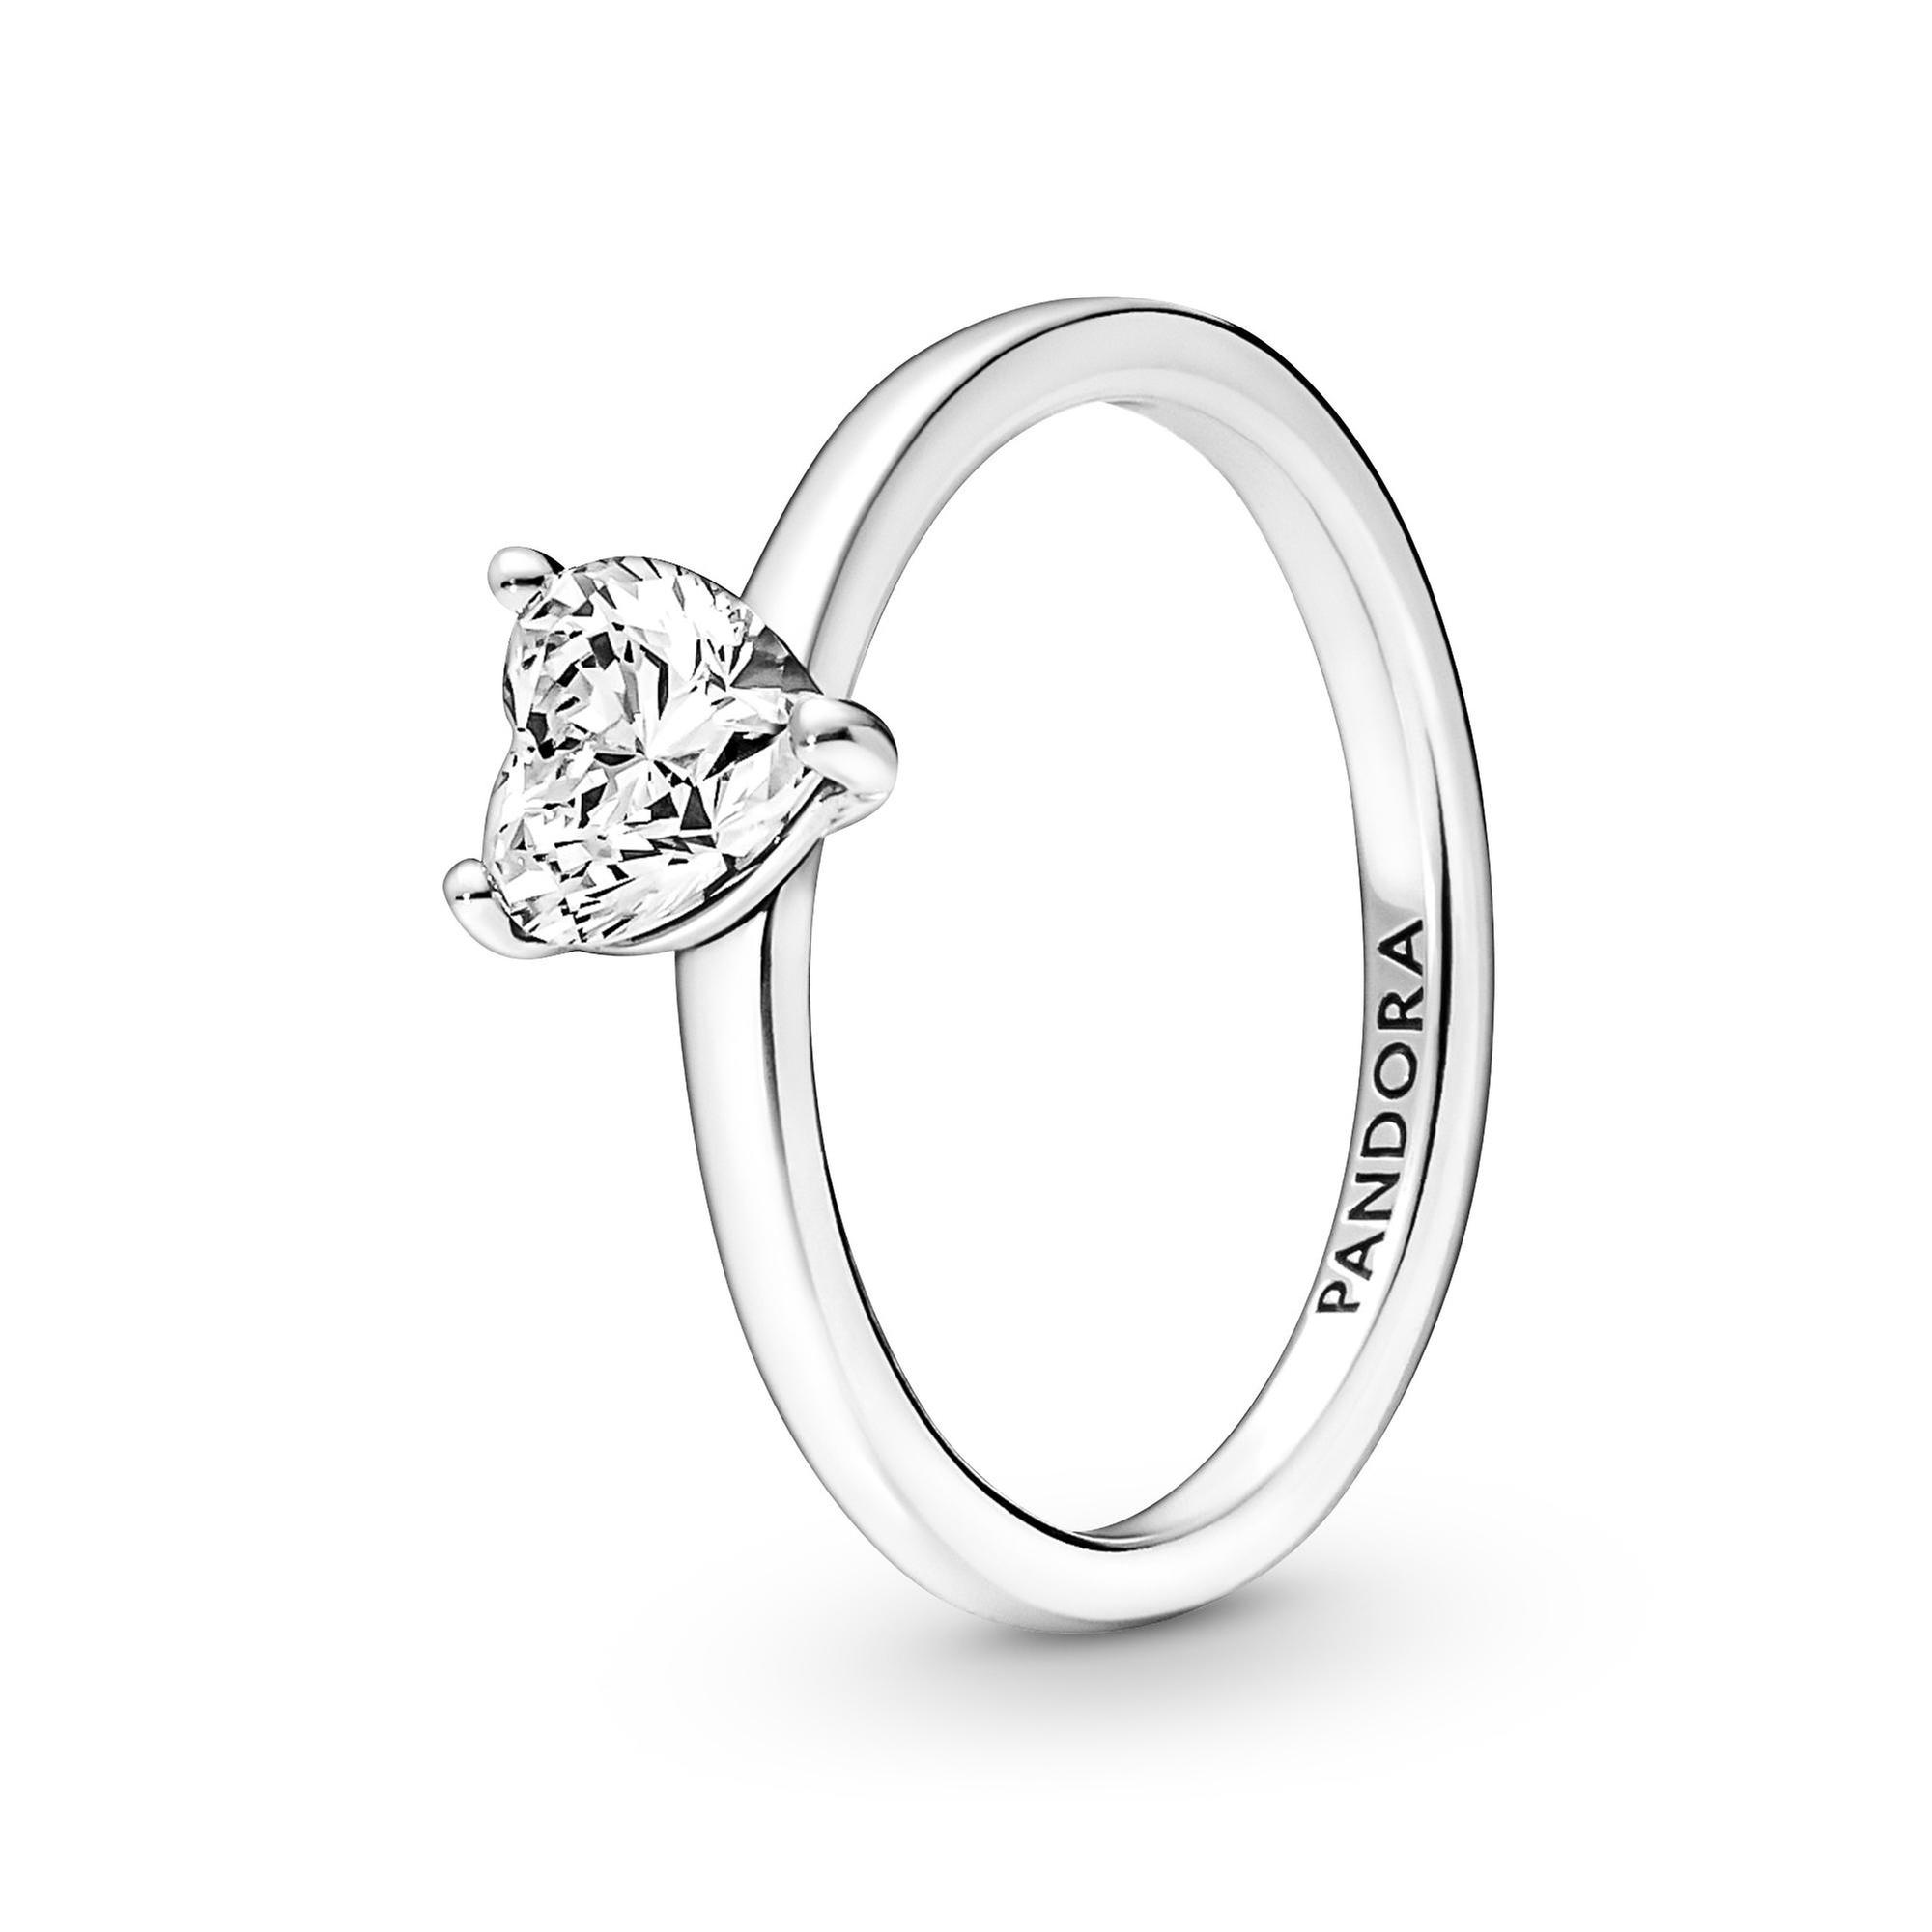 Pandora Sparkling Heart Solitaire Ring - Size 5